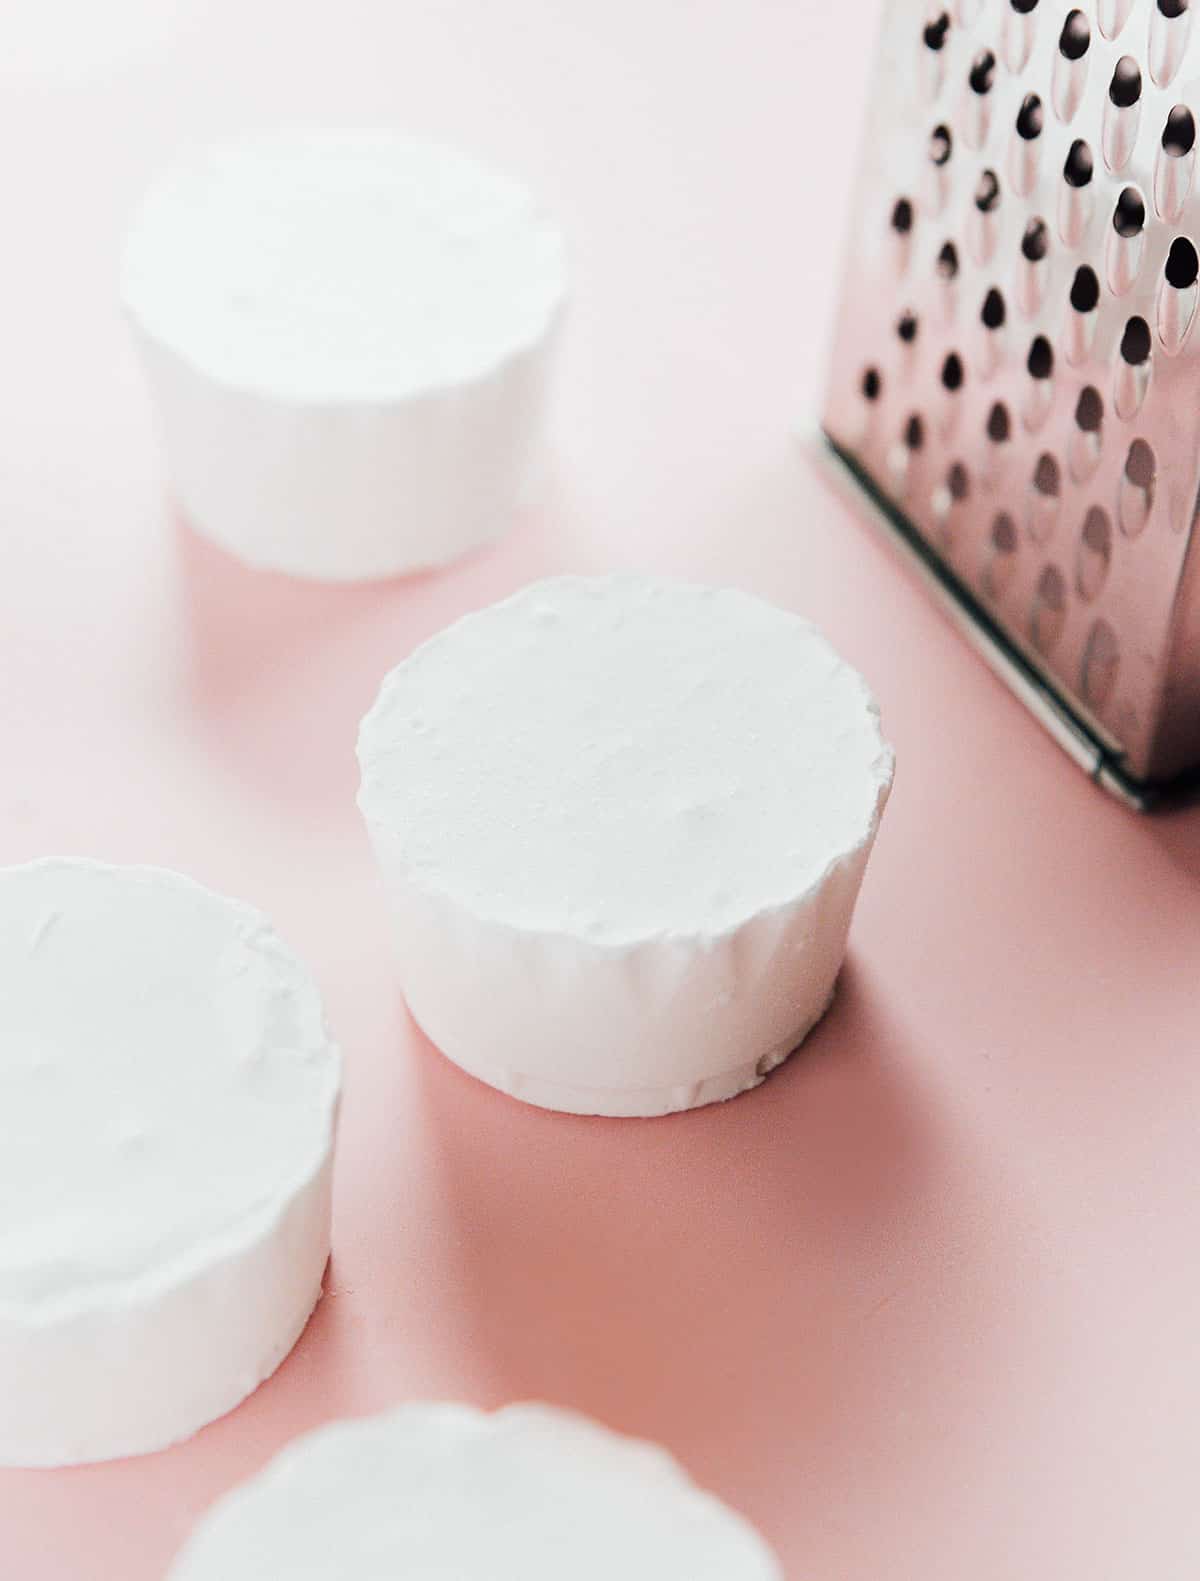 Coconut oil fat pucks on a pink surface.